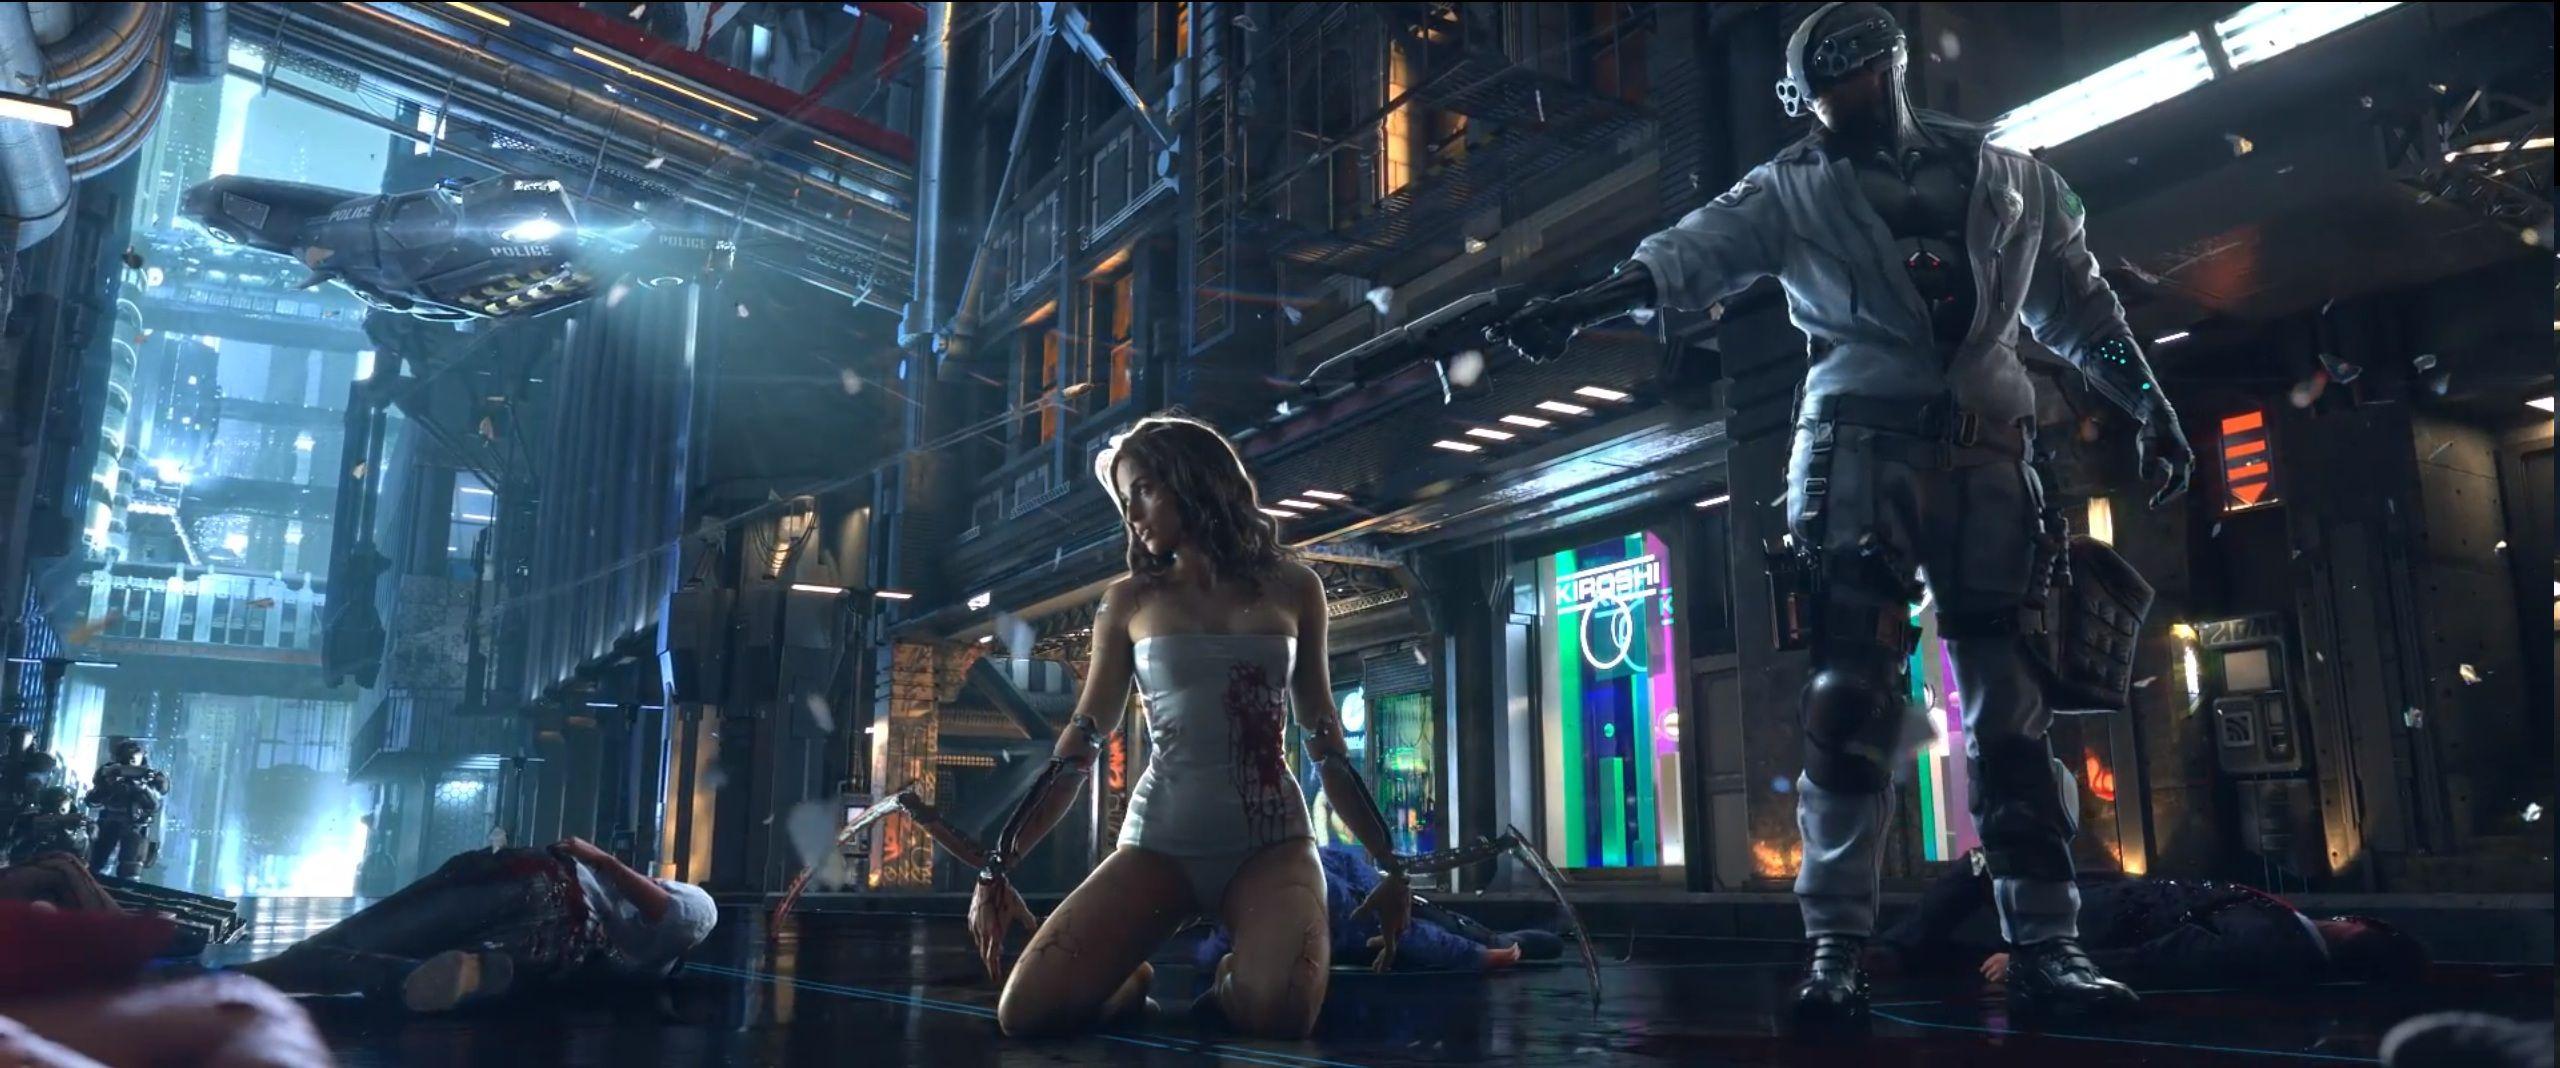 Cyberpunk 2077 To Be Far Bigger Than The Witcher Says Dev